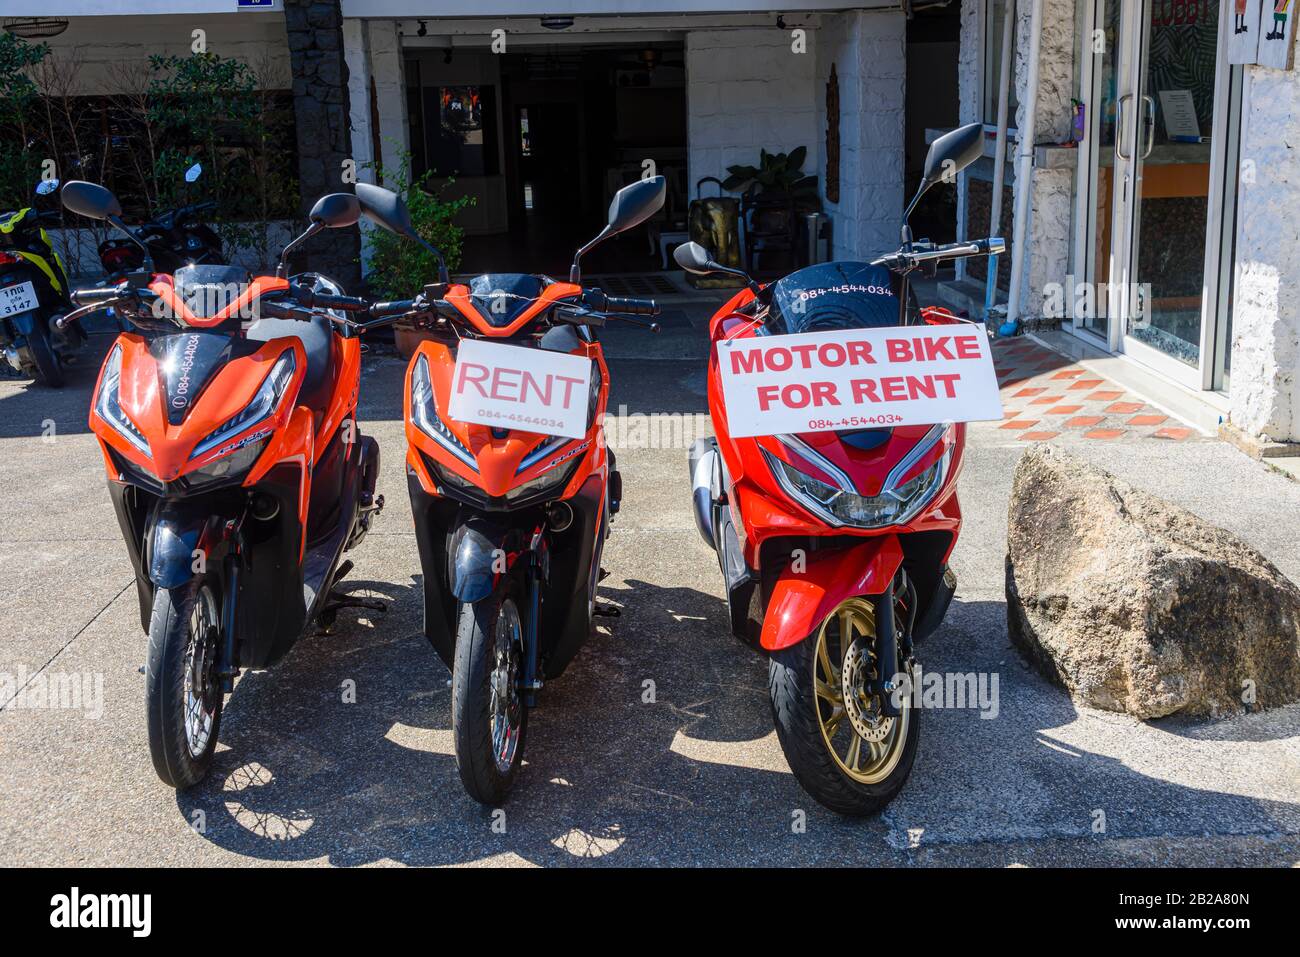 Motorbikes and scooters for rent, Kata, Thailand. Stock Photo